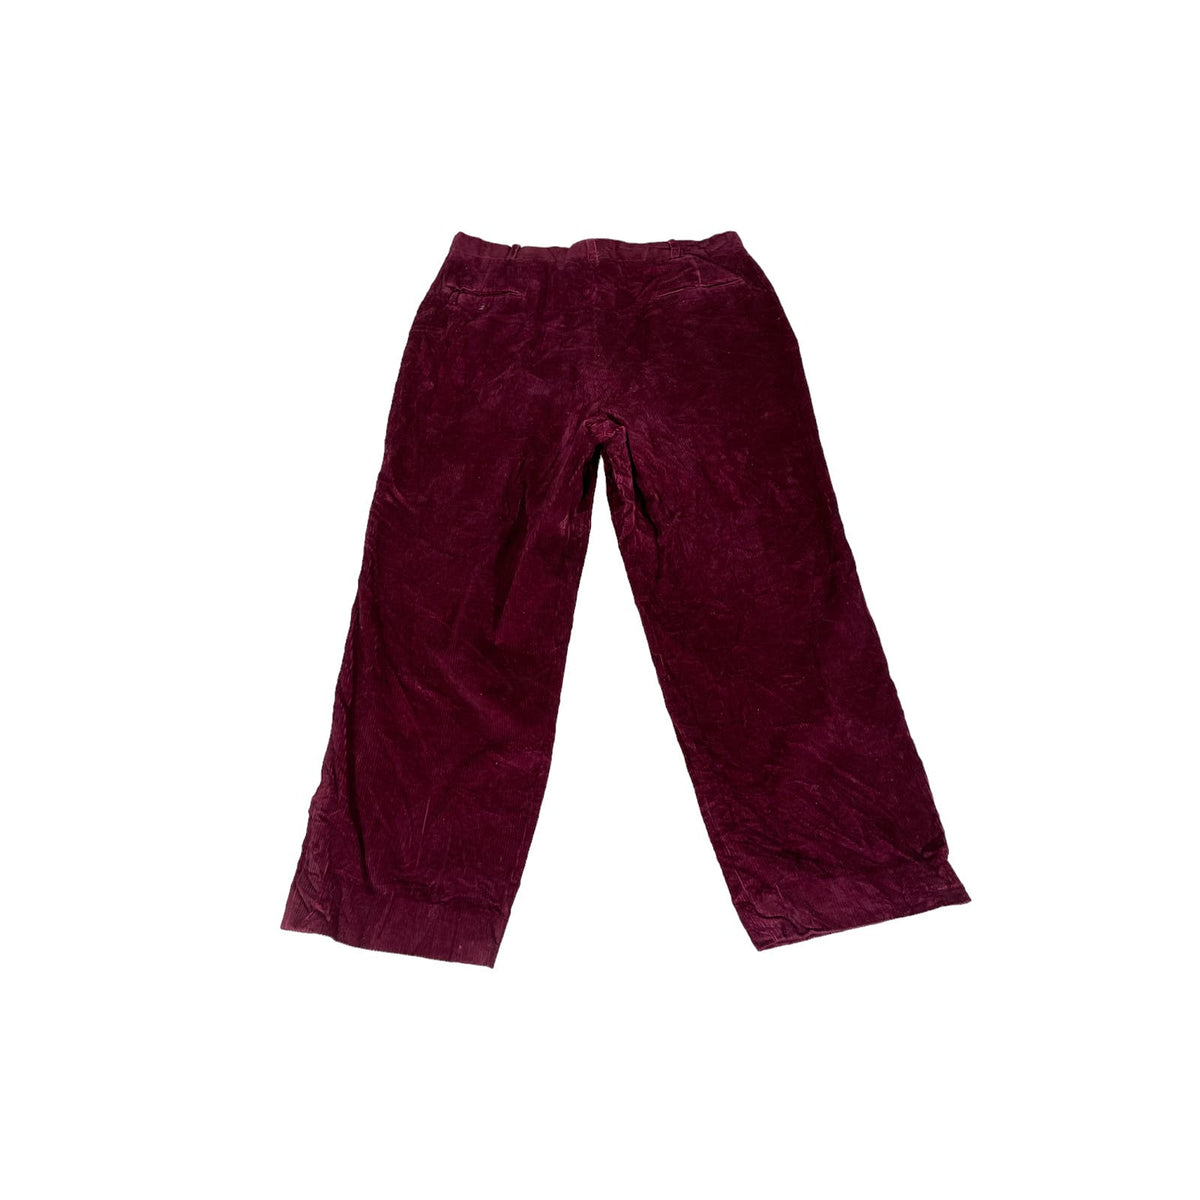 Vintage Cotton Brothers Men's Wine Red Relaxed Fit Corduroy Pants 36x28